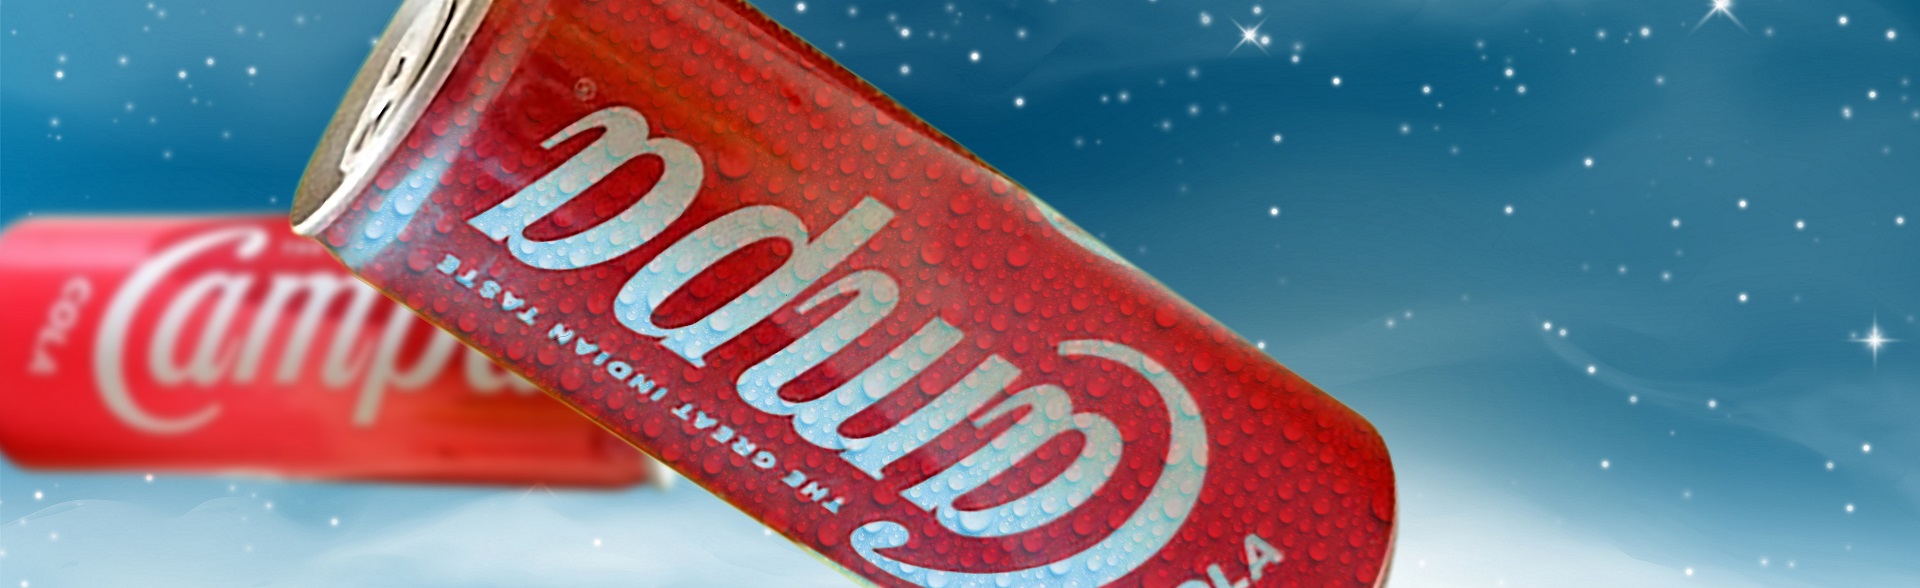 Banner for Campa Cola in tin Flavour